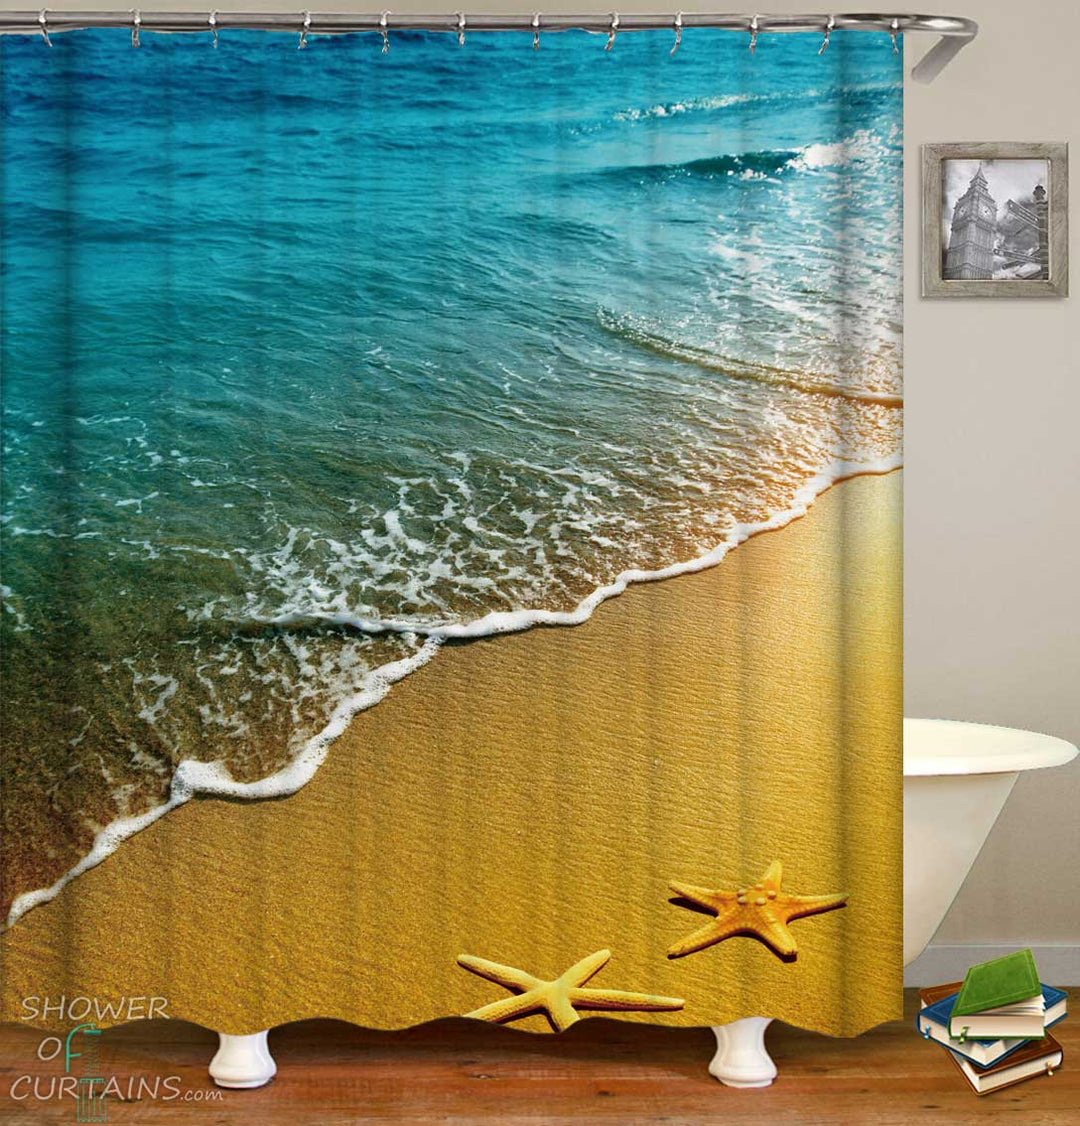 Shower Curtains with Two Starfish Tanning on the Beach